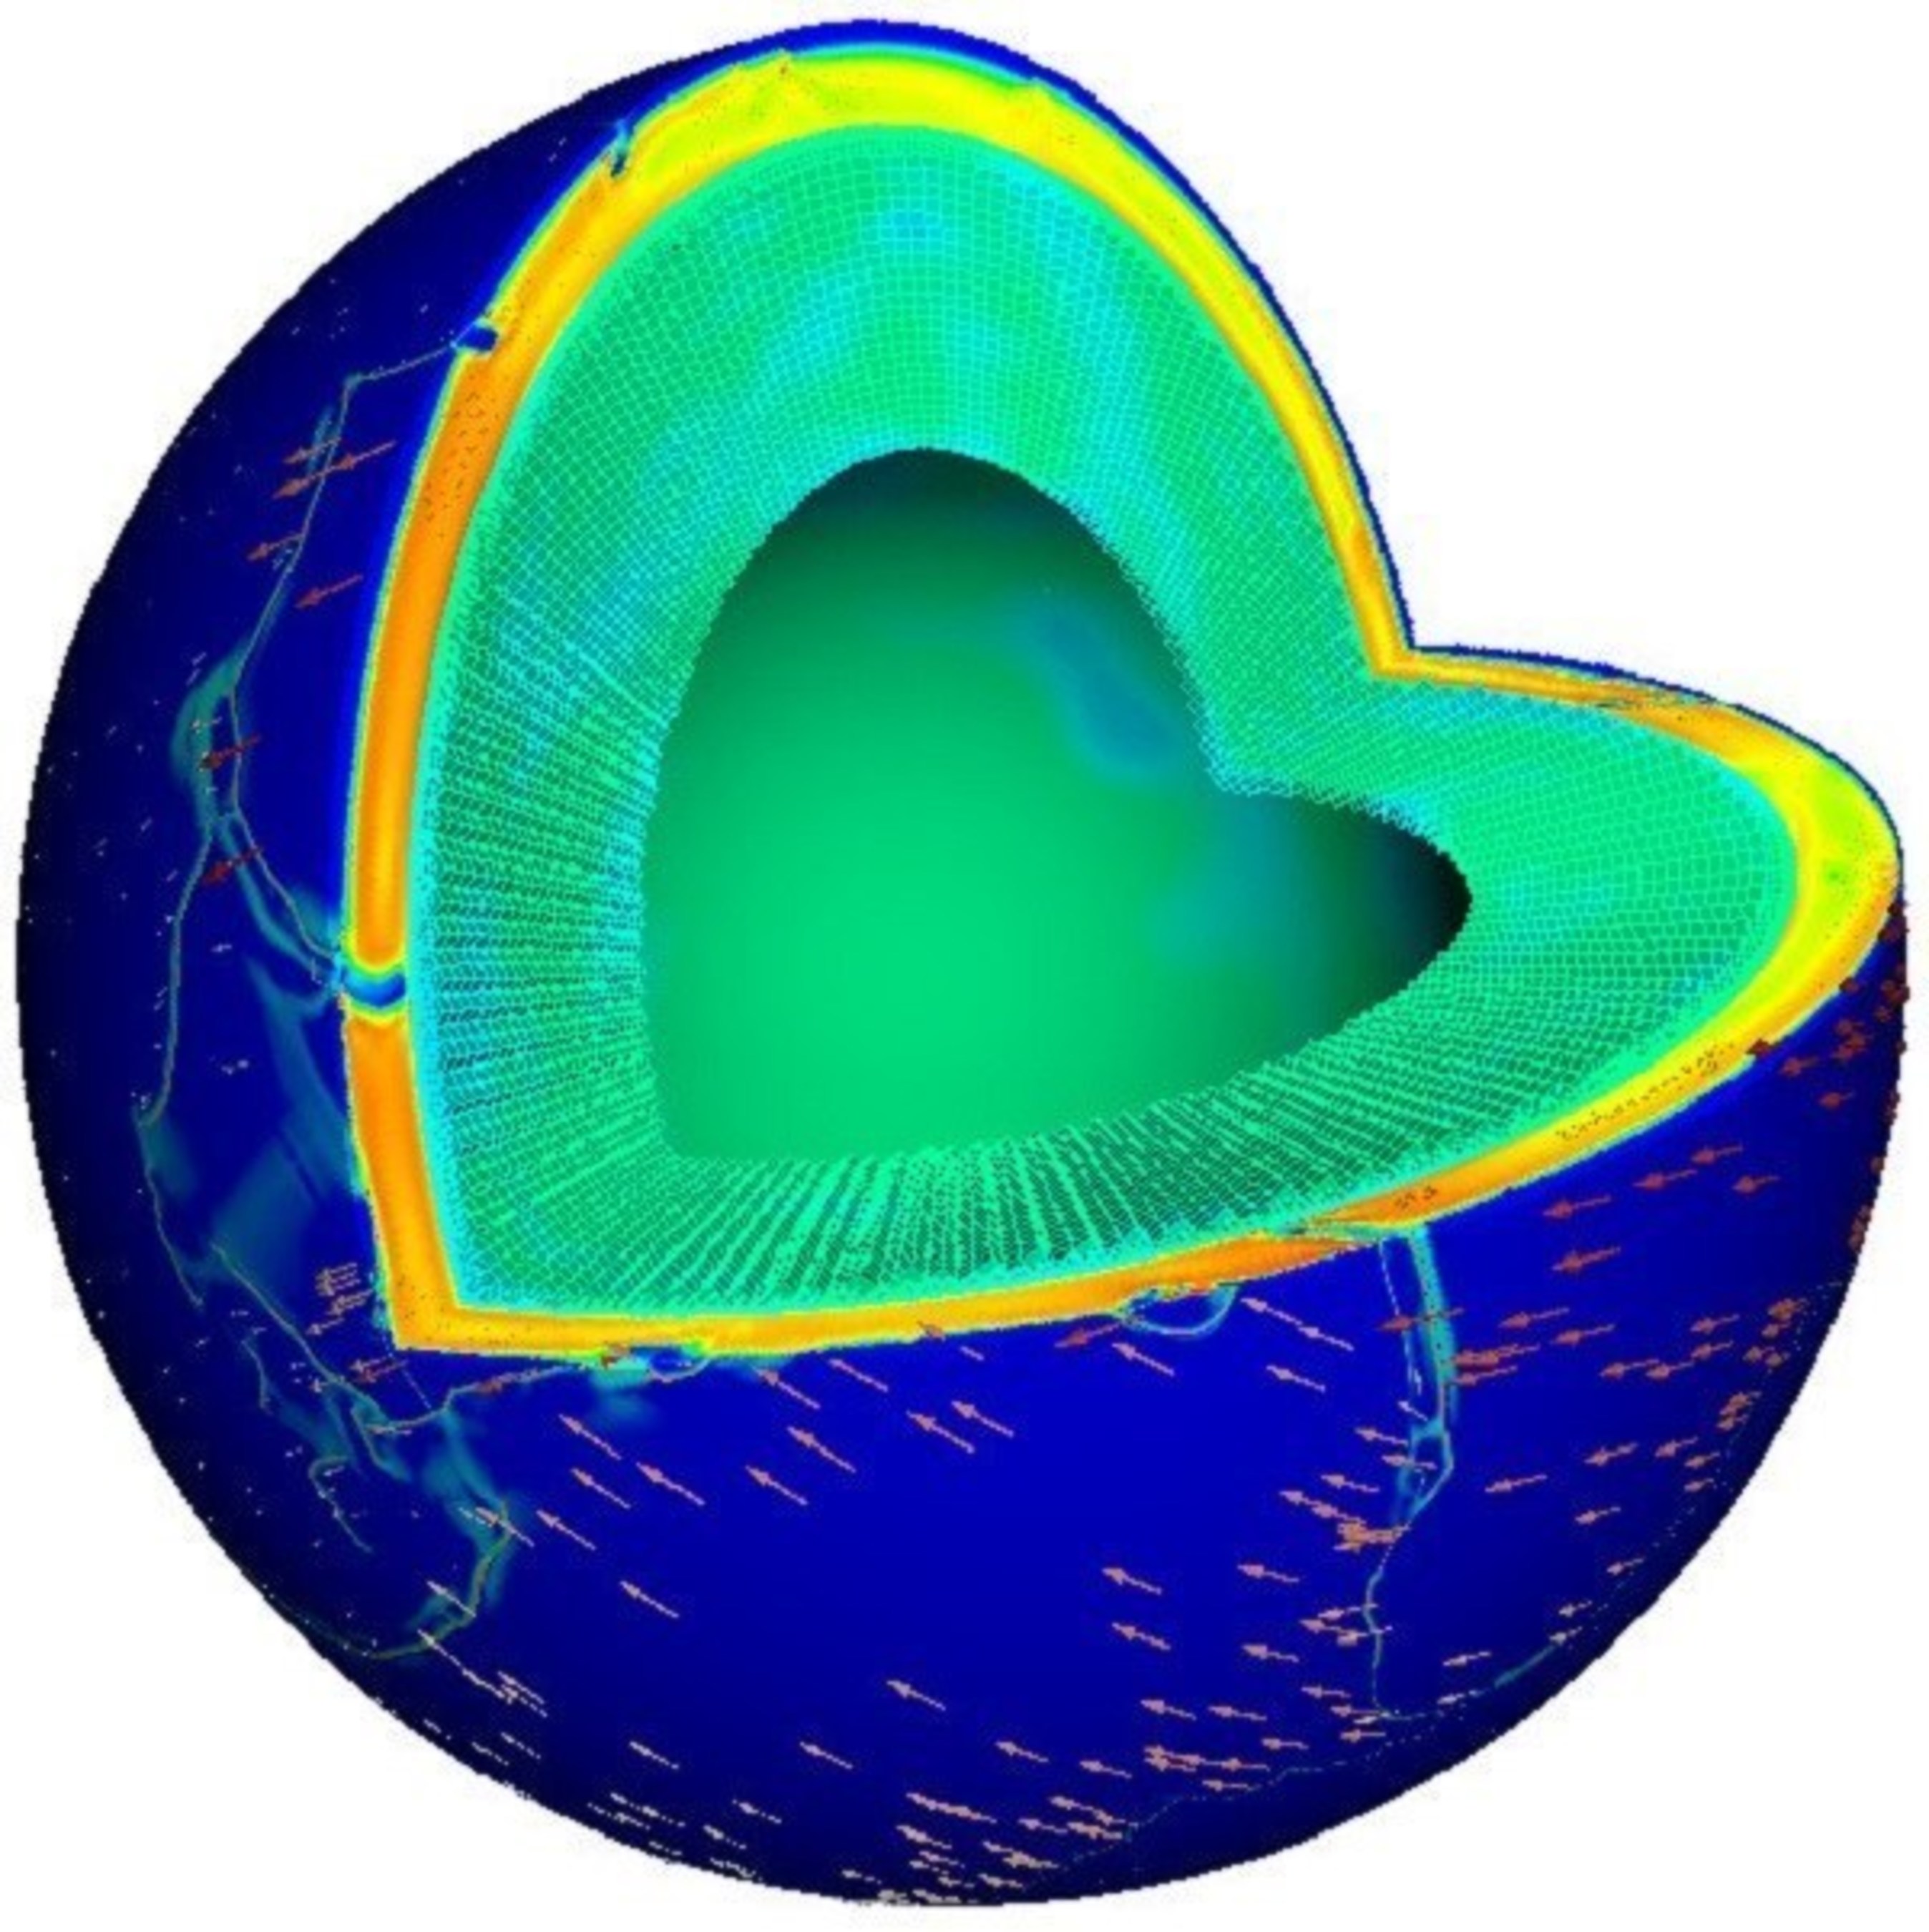 Scientists at IBM Research, the University of Texas at Austin, New York University and the California Institute of Technology have been awarded the 2015 Gordon Bell Prize for realistically simulating the forces inside the Earth that drive plate tectonics. The work paves the way toward better understanding of earthquakes and volcanic activity. The accomplishment was made using 1.6 million cores on the 96 racks of "Sequoia" - the IBM BlueGene/Q system located at the Lawrence Livermore National Laboratory, one of the world's fastest supercomputers. The illustration depicts the mantle viscosity and the arrows show the motion of the tectonic plates.